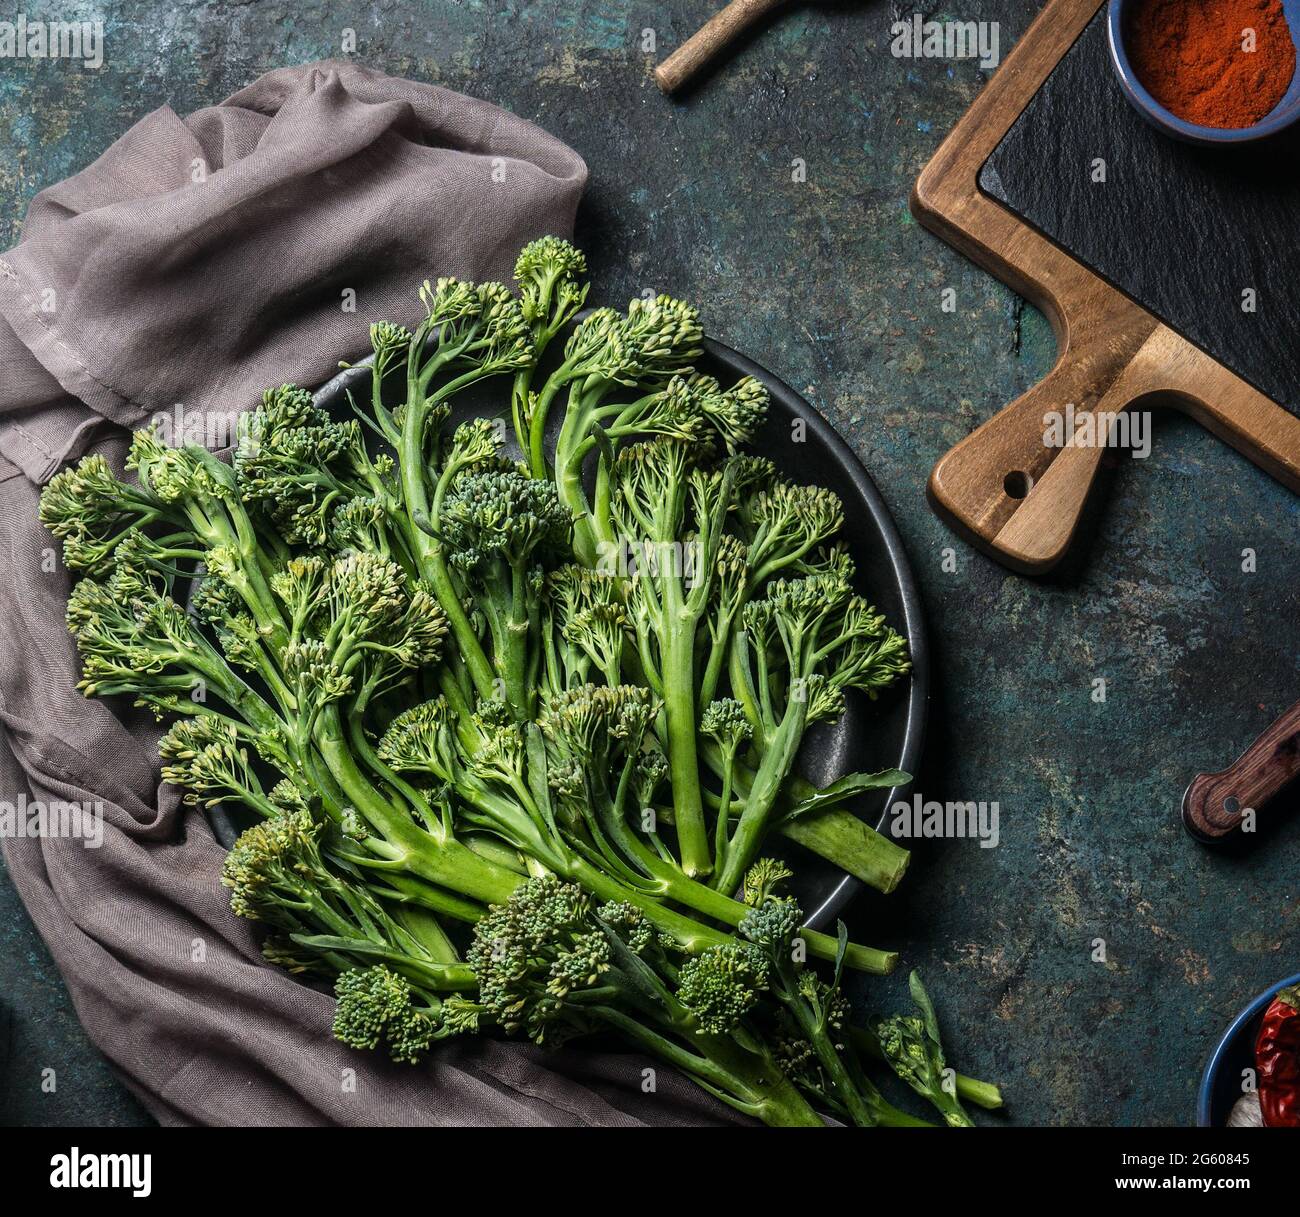 Bunch of wild broccoli on a dark kitchen table for healthy cooking and vegan cuisine. View from above Stock Photo